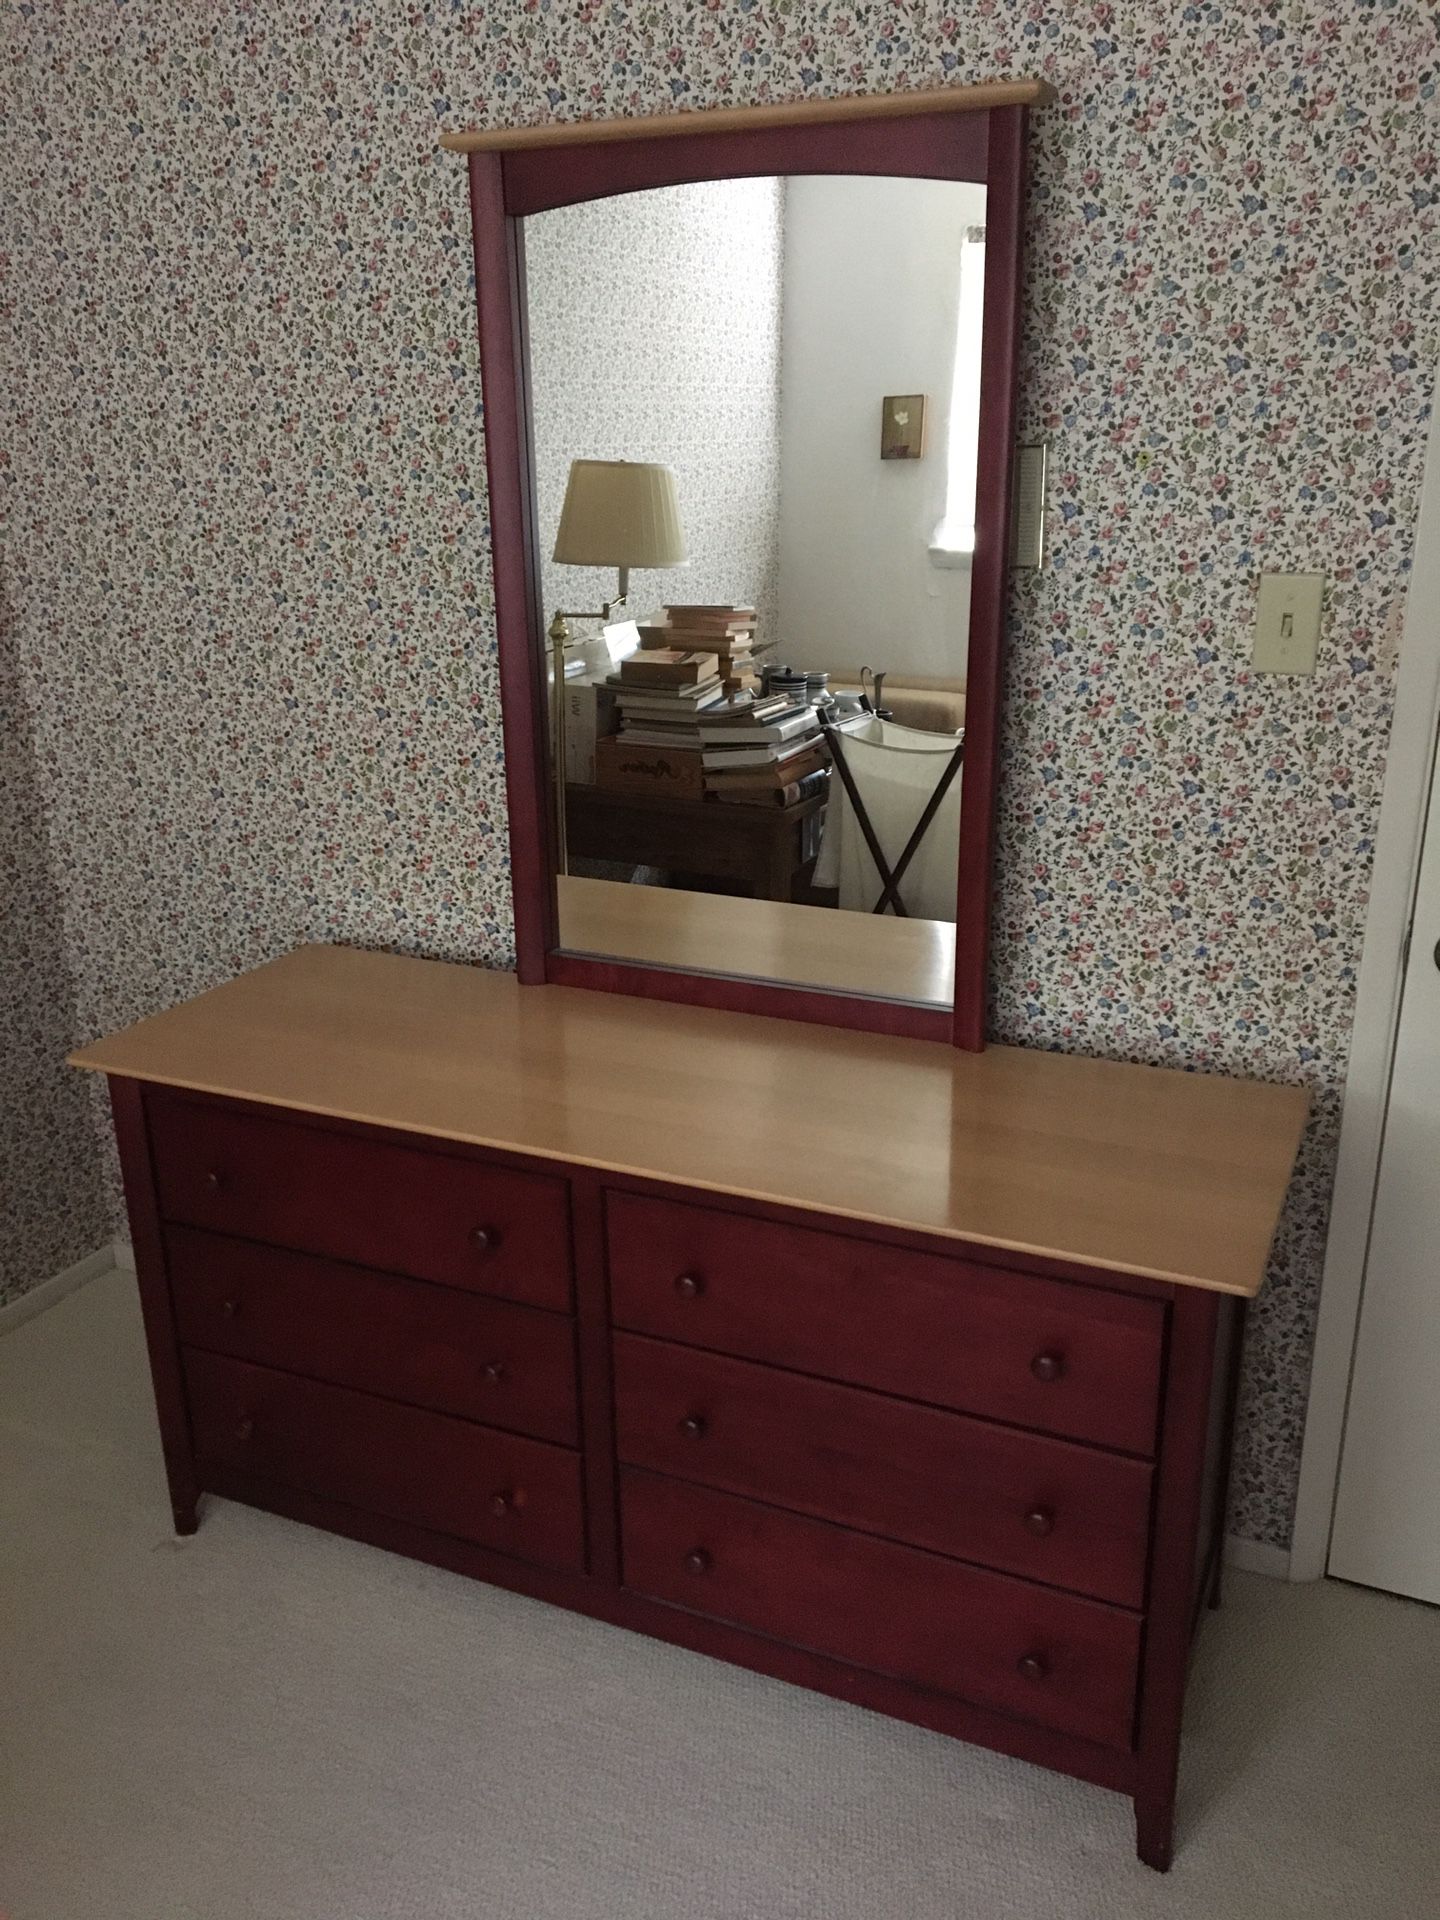 Bedroom Set (Dresser, Mirror, Night Stands, and Drawer Chest) —PENDING PICKUP